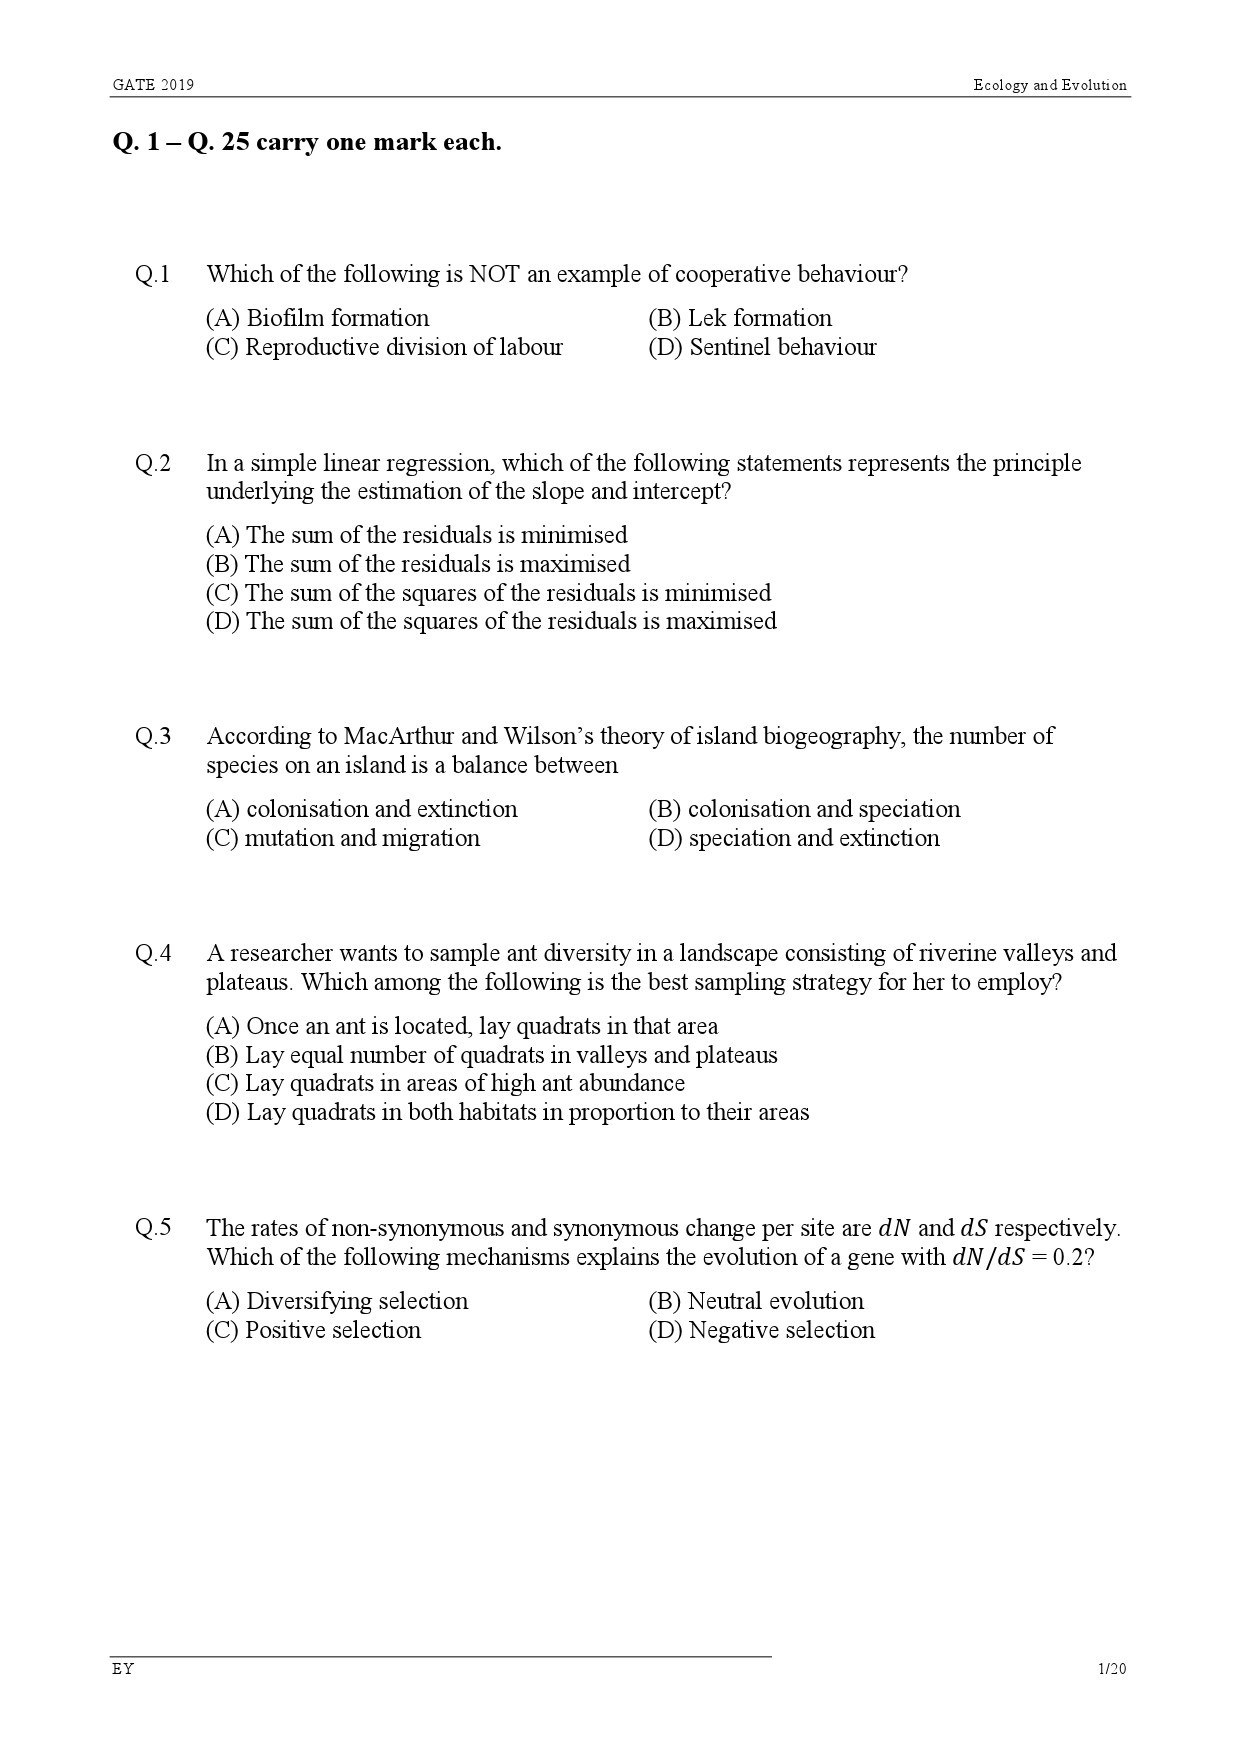 GATE Exam Question Paper 2019 Ecology and Evolution 4